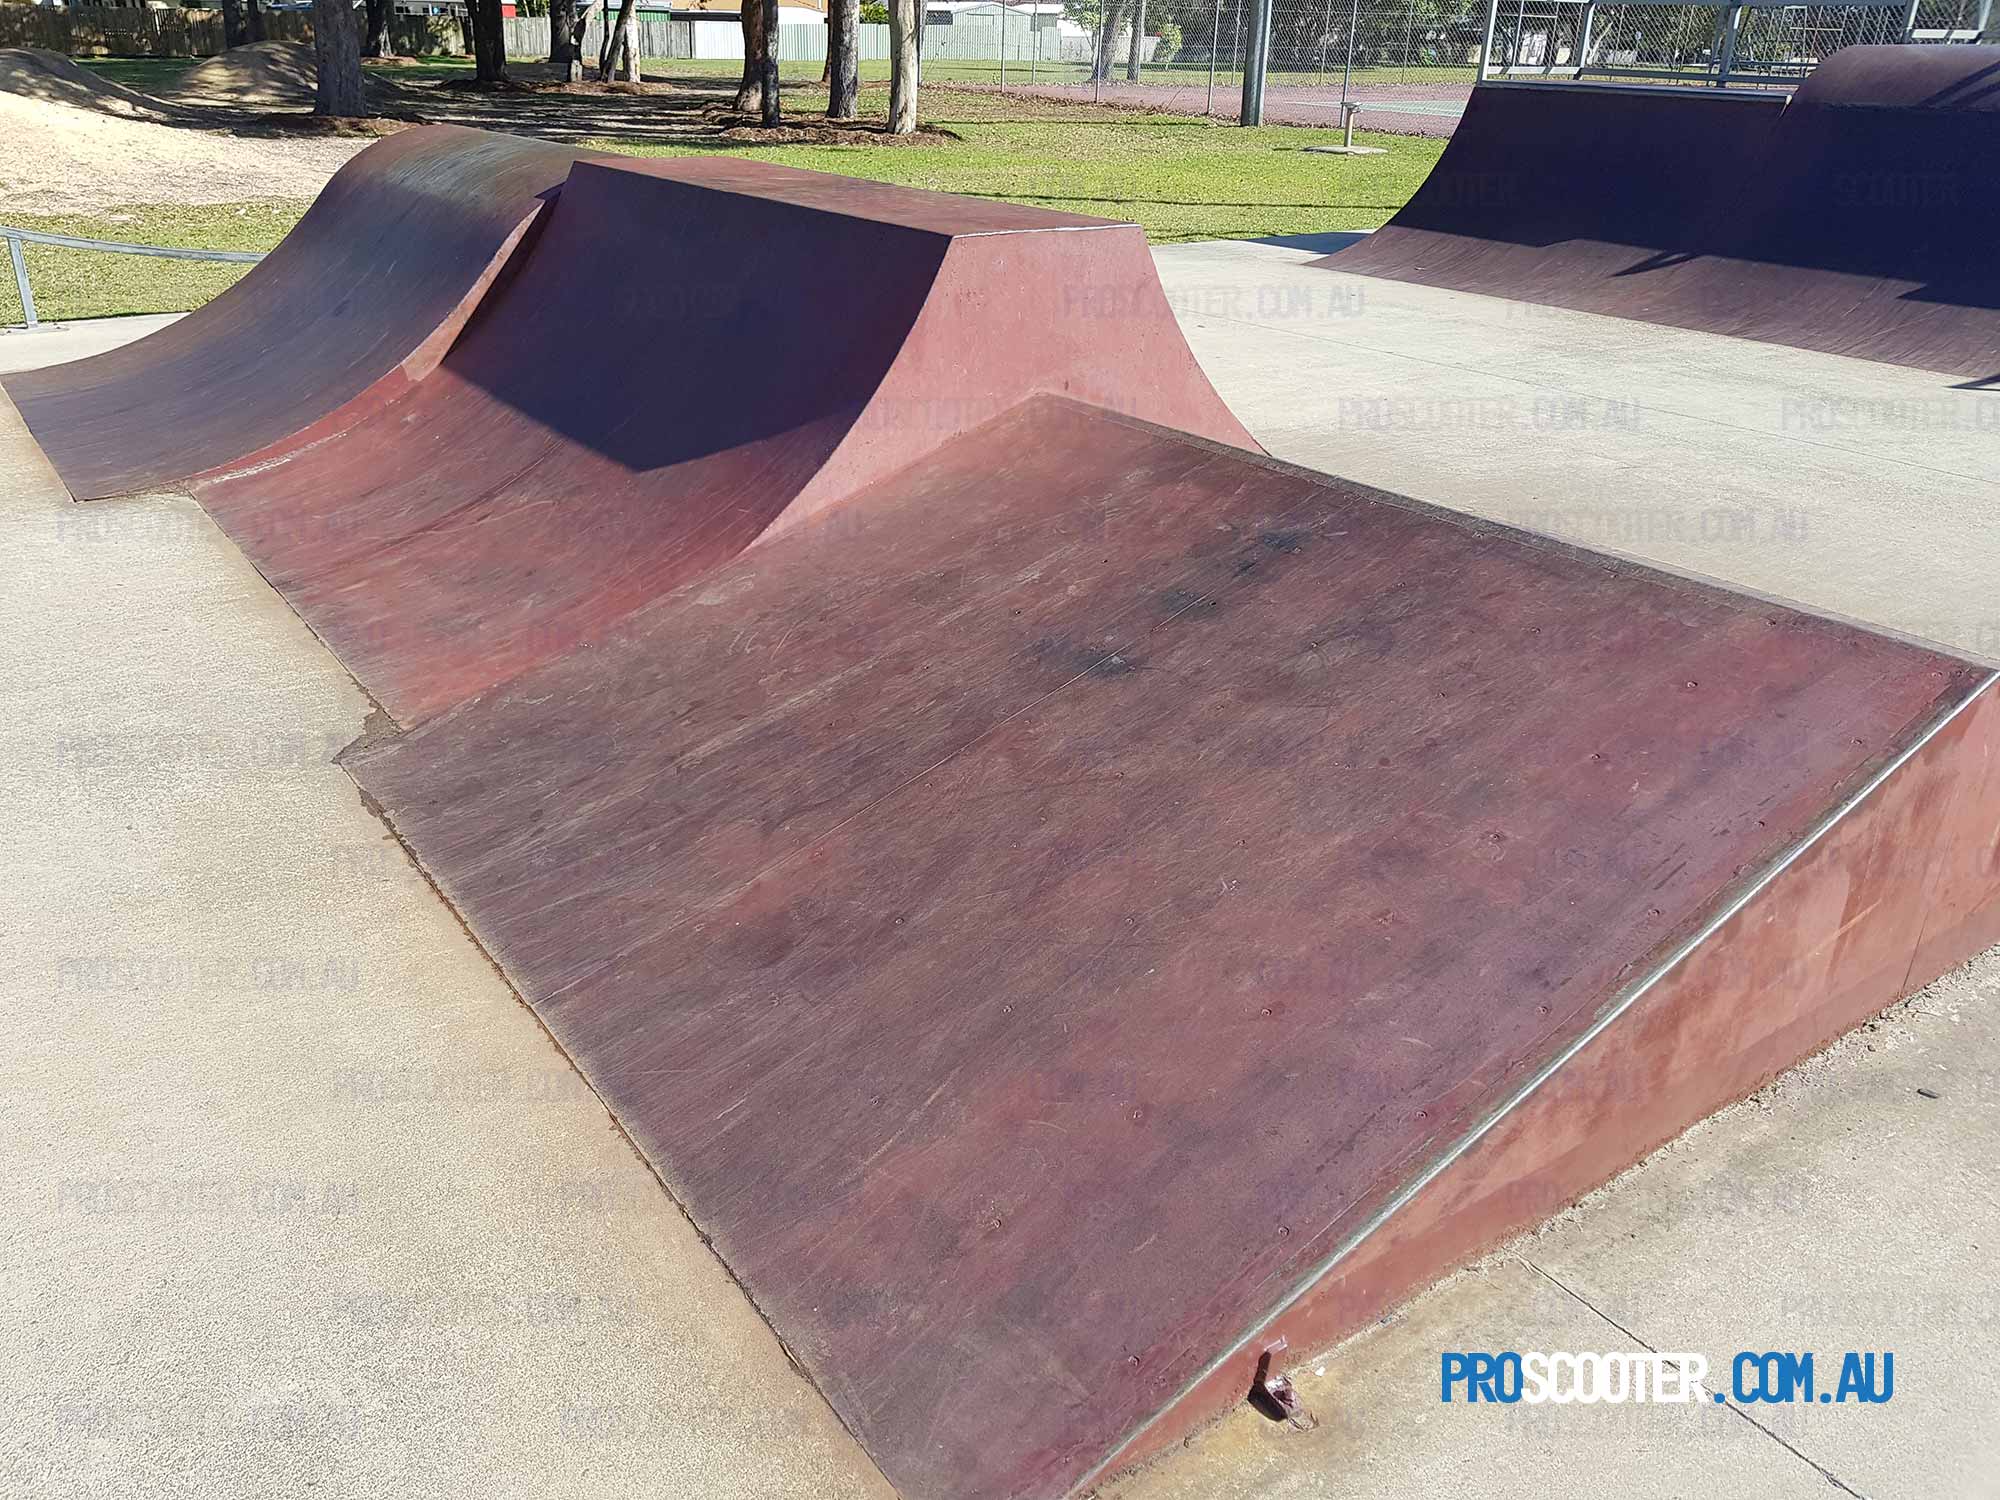 Prefab combo box at Jacobs Well Skate Park